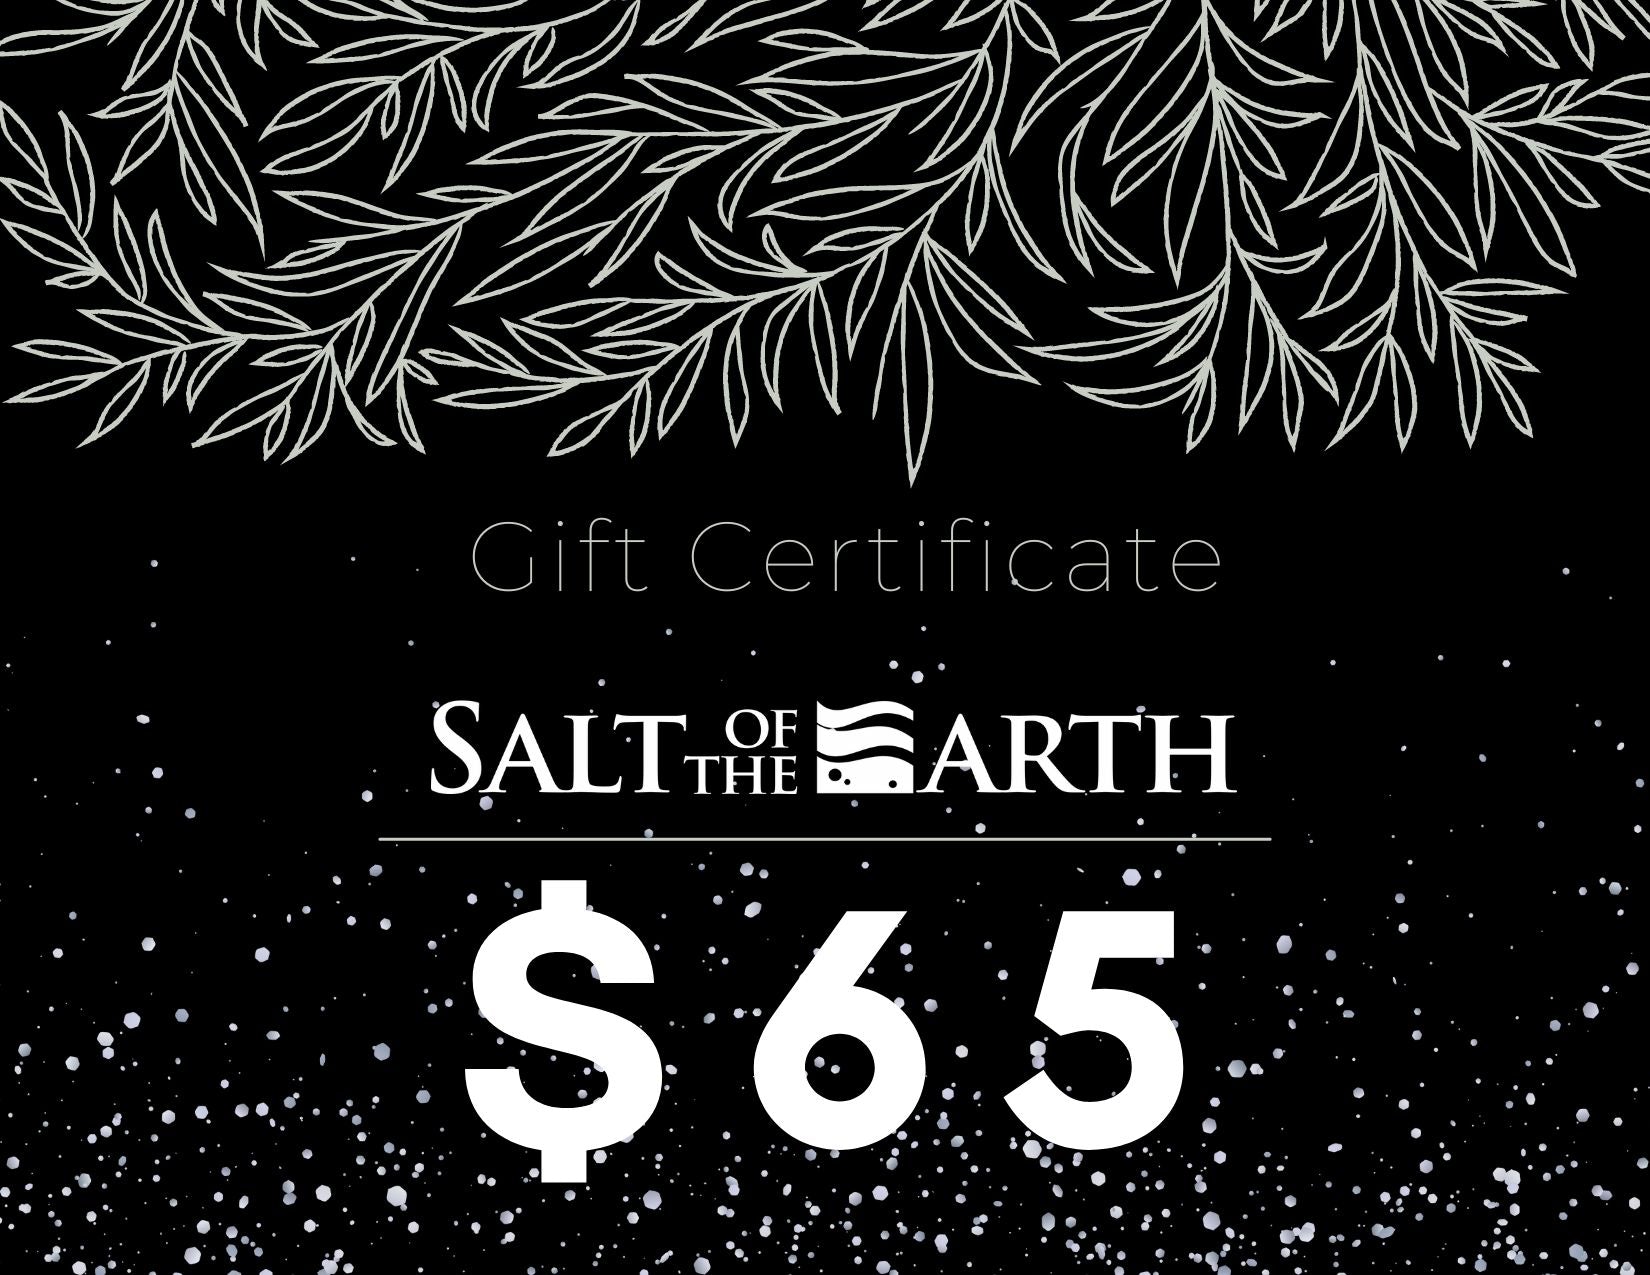 SALT OF THE EARTH NATURAL SKINCARE INSTANT GIFT CERTIFICATE - SALT OF THE EARTH